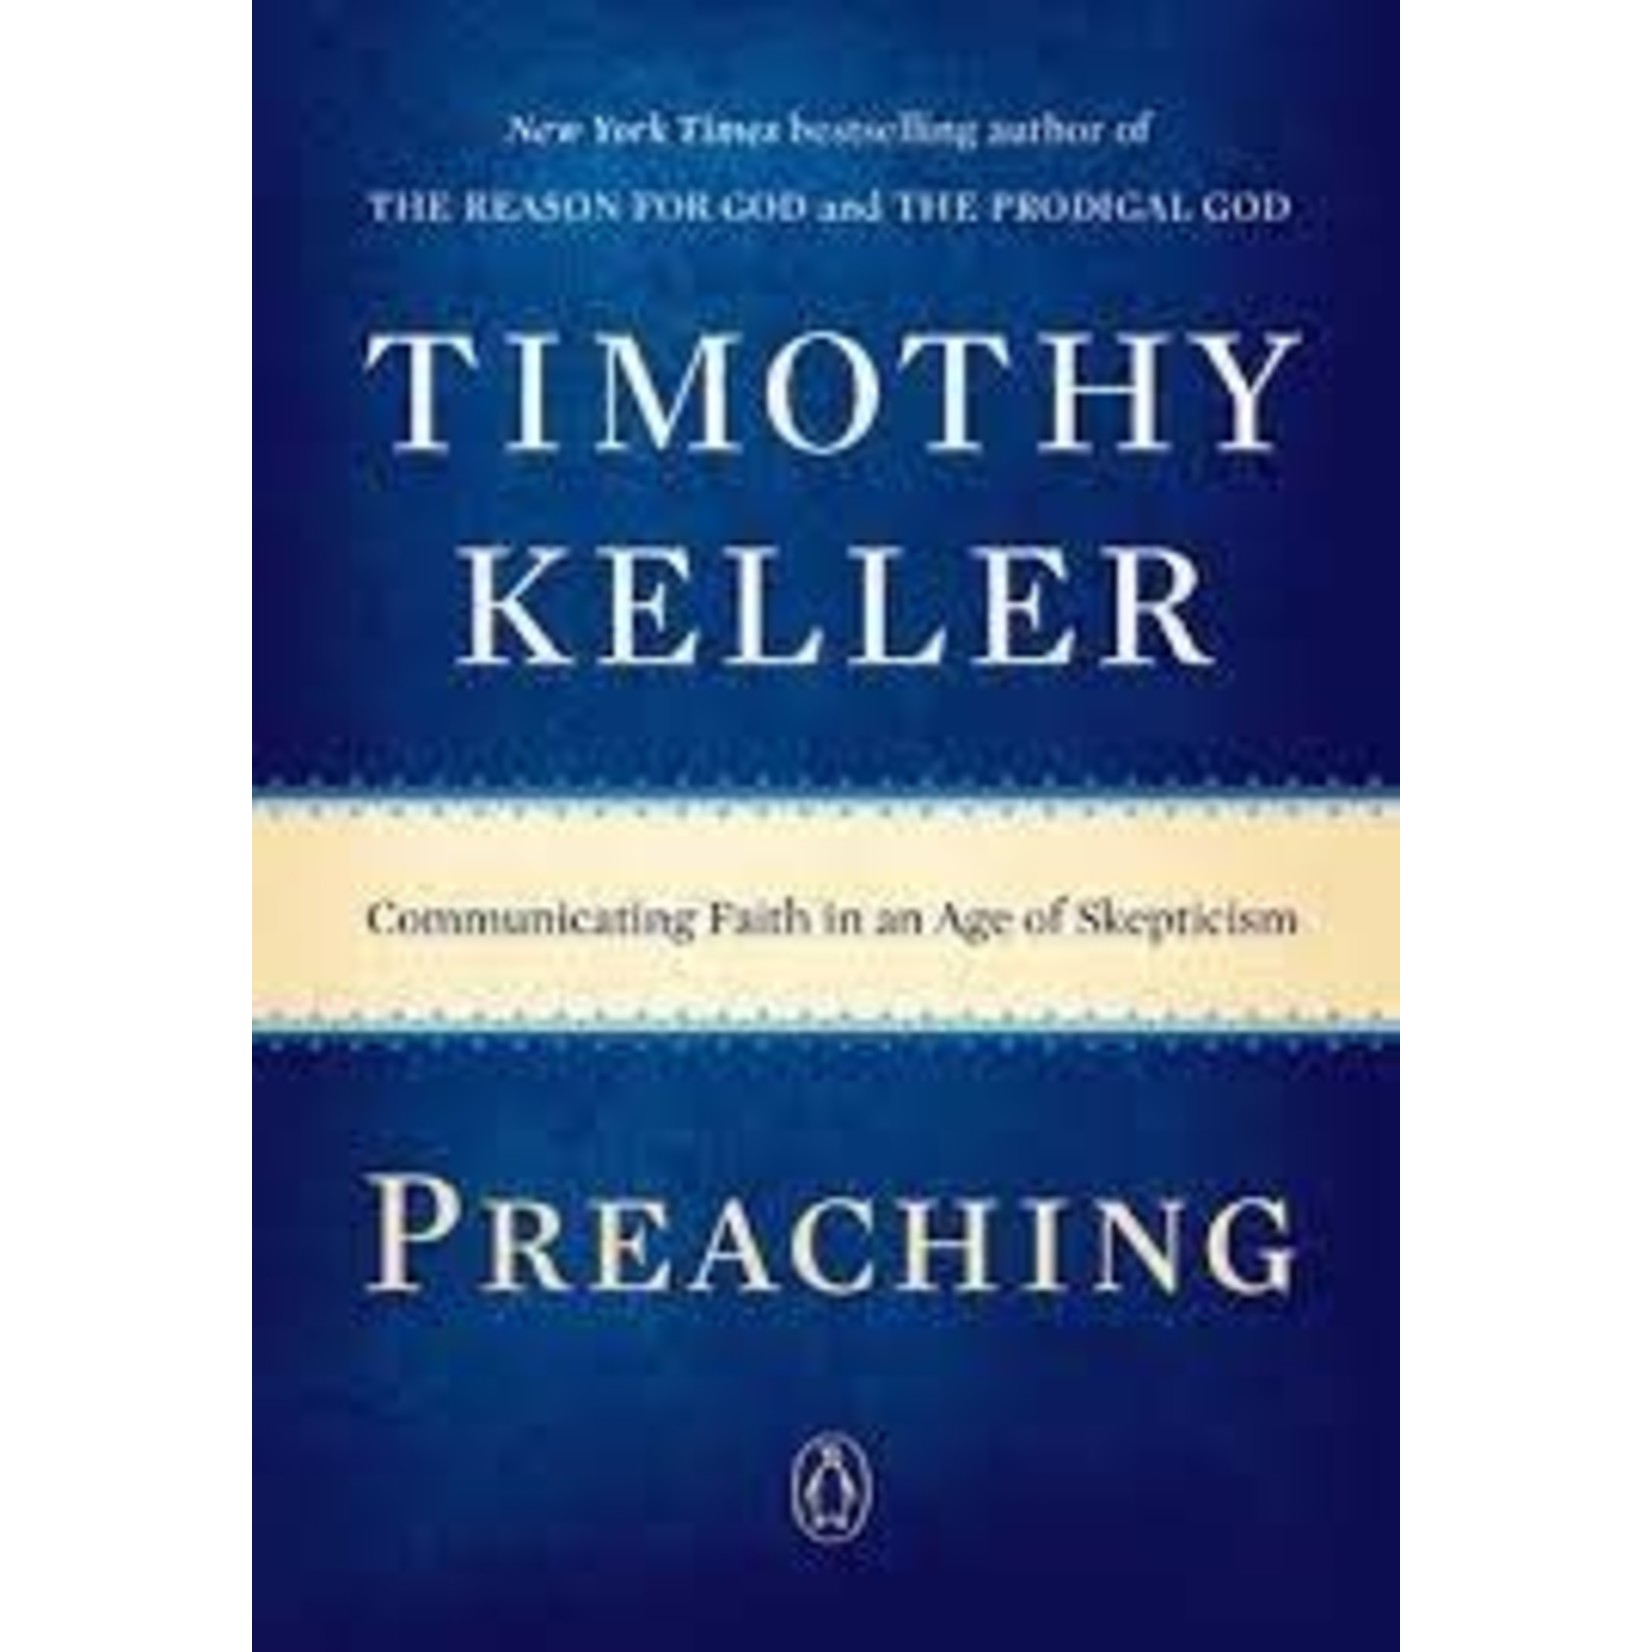 Preaching: Communicationg Faith on an age of skepticism